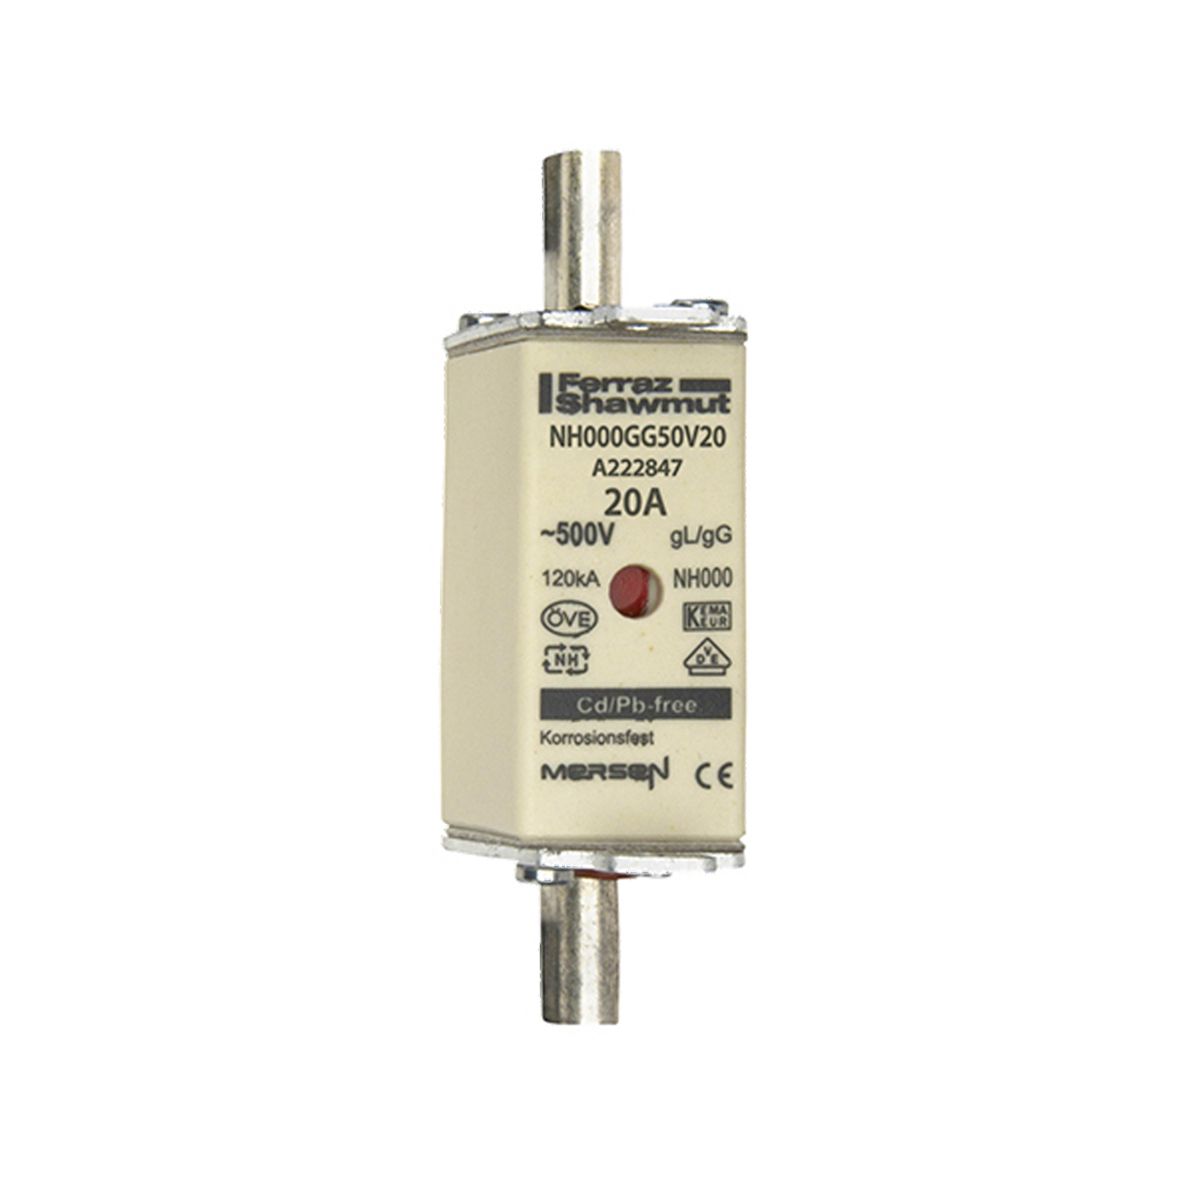 A222847 - NH fuse-link gG, 500VAC, size 000, 20A double indicator/live tags